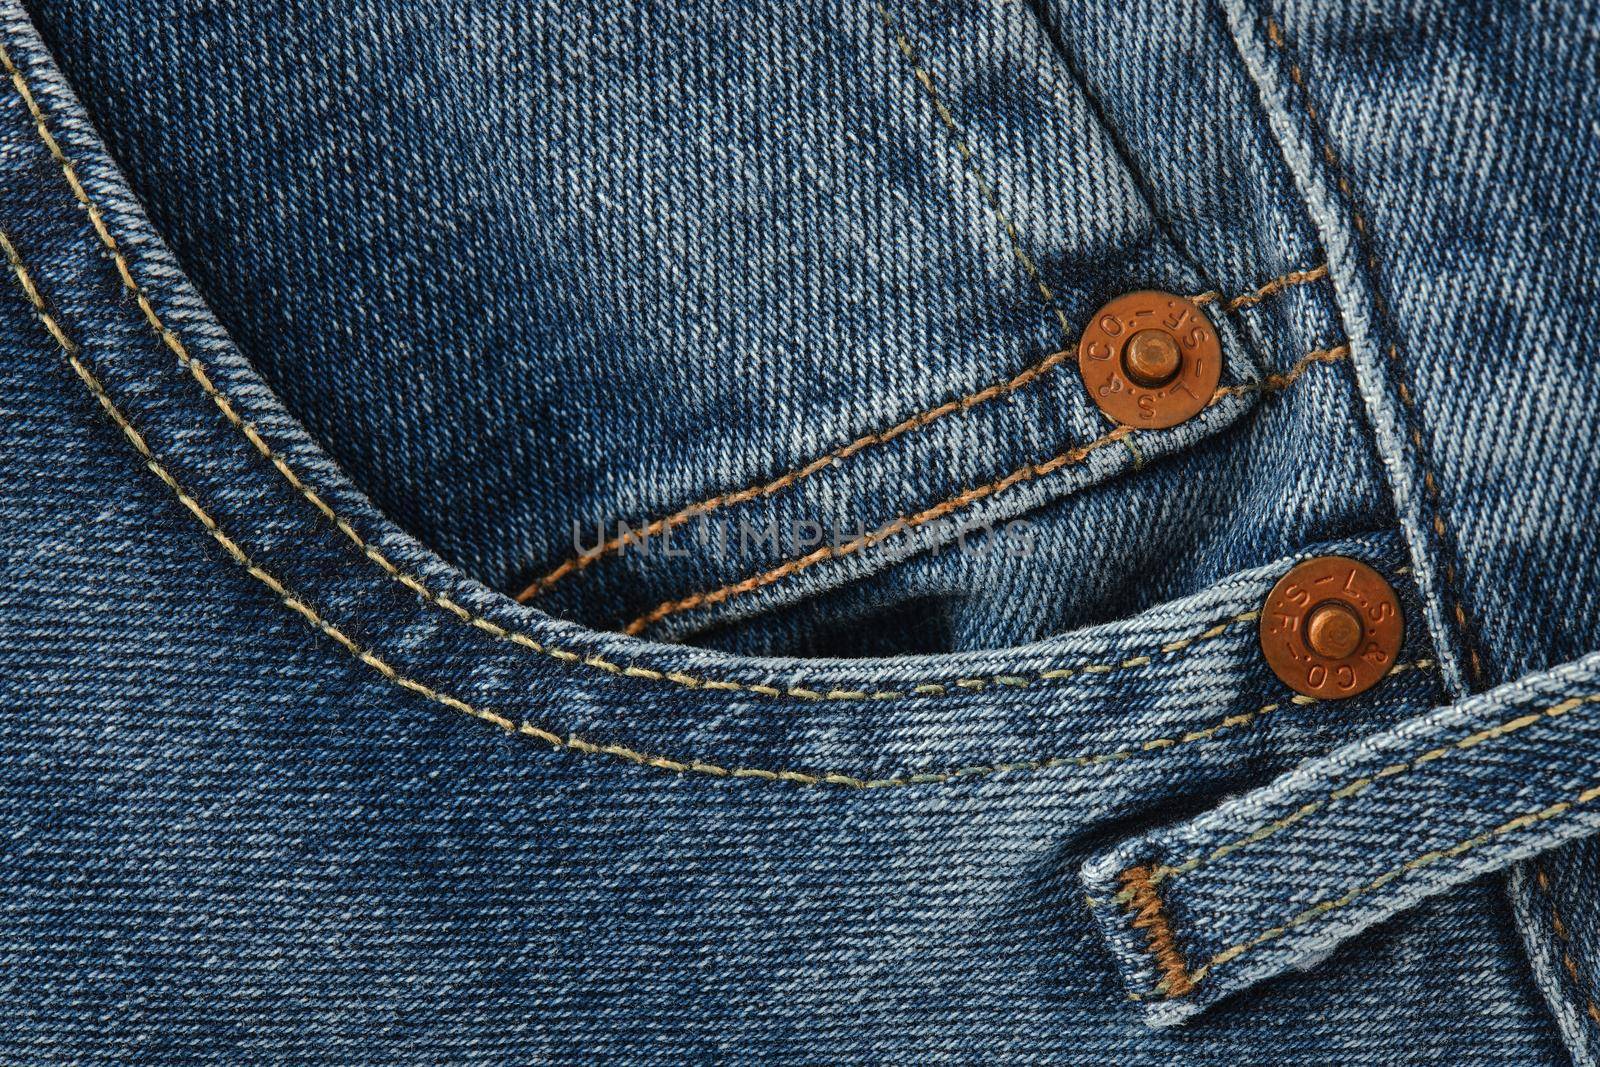 Close up of details of new LEVI'S 501 Jeans. Buttons and seams and pockets close-up. Classic jeans model. LEVI'S is a brand name of Levi Strauss and Co, founded in 1853. 31.12.2021, Rostov, Russia by EvgeniyQW